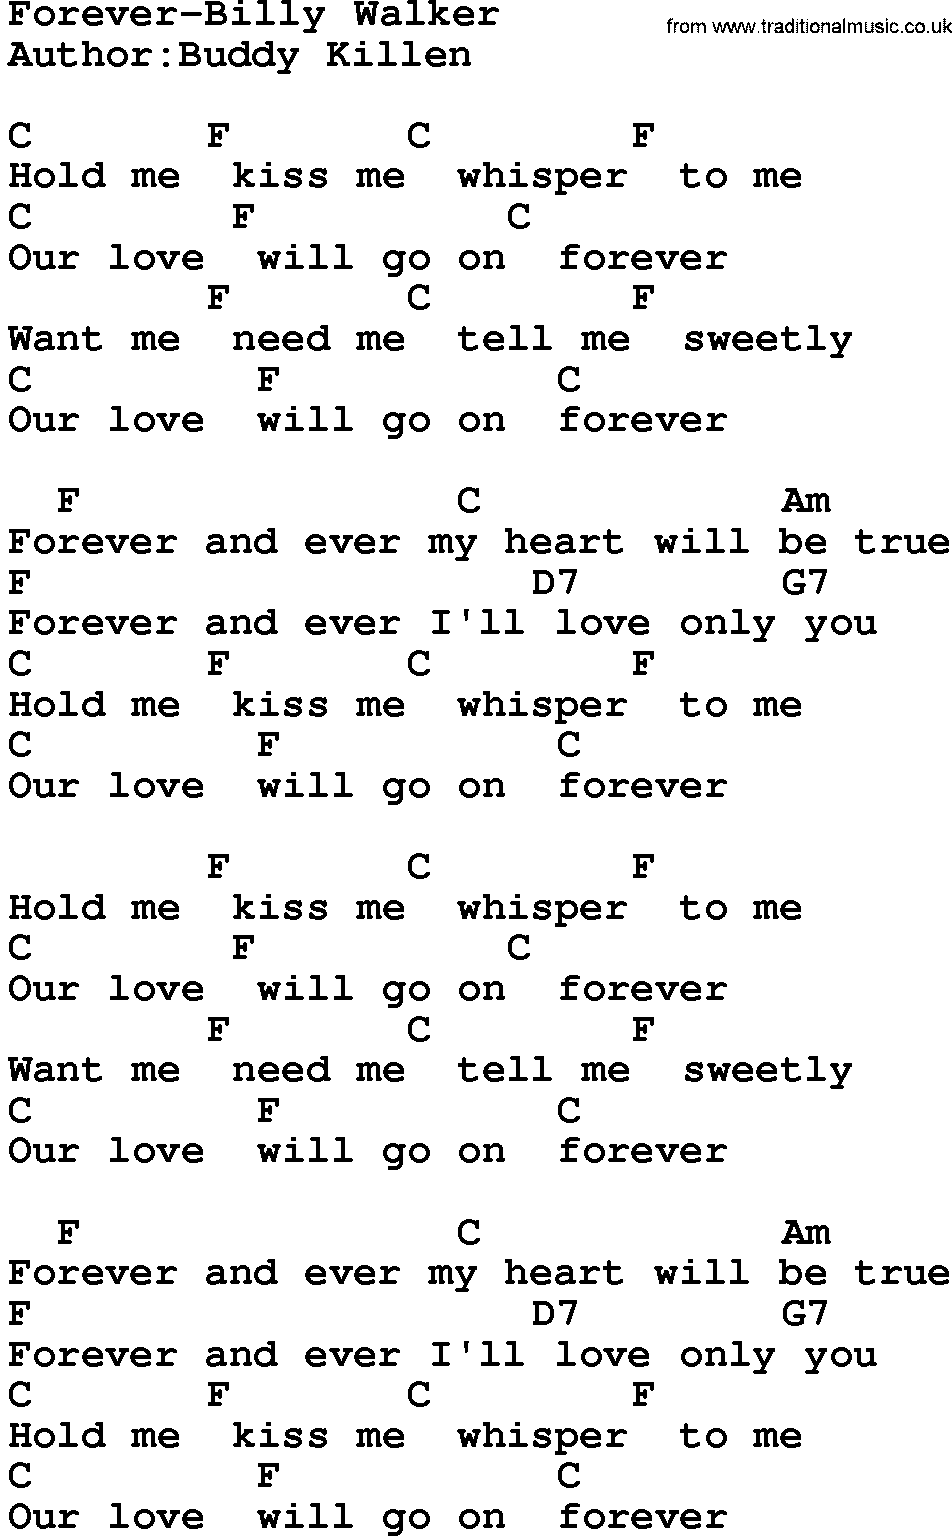 Country music song: Forever-Billy Walker lyrics and chords